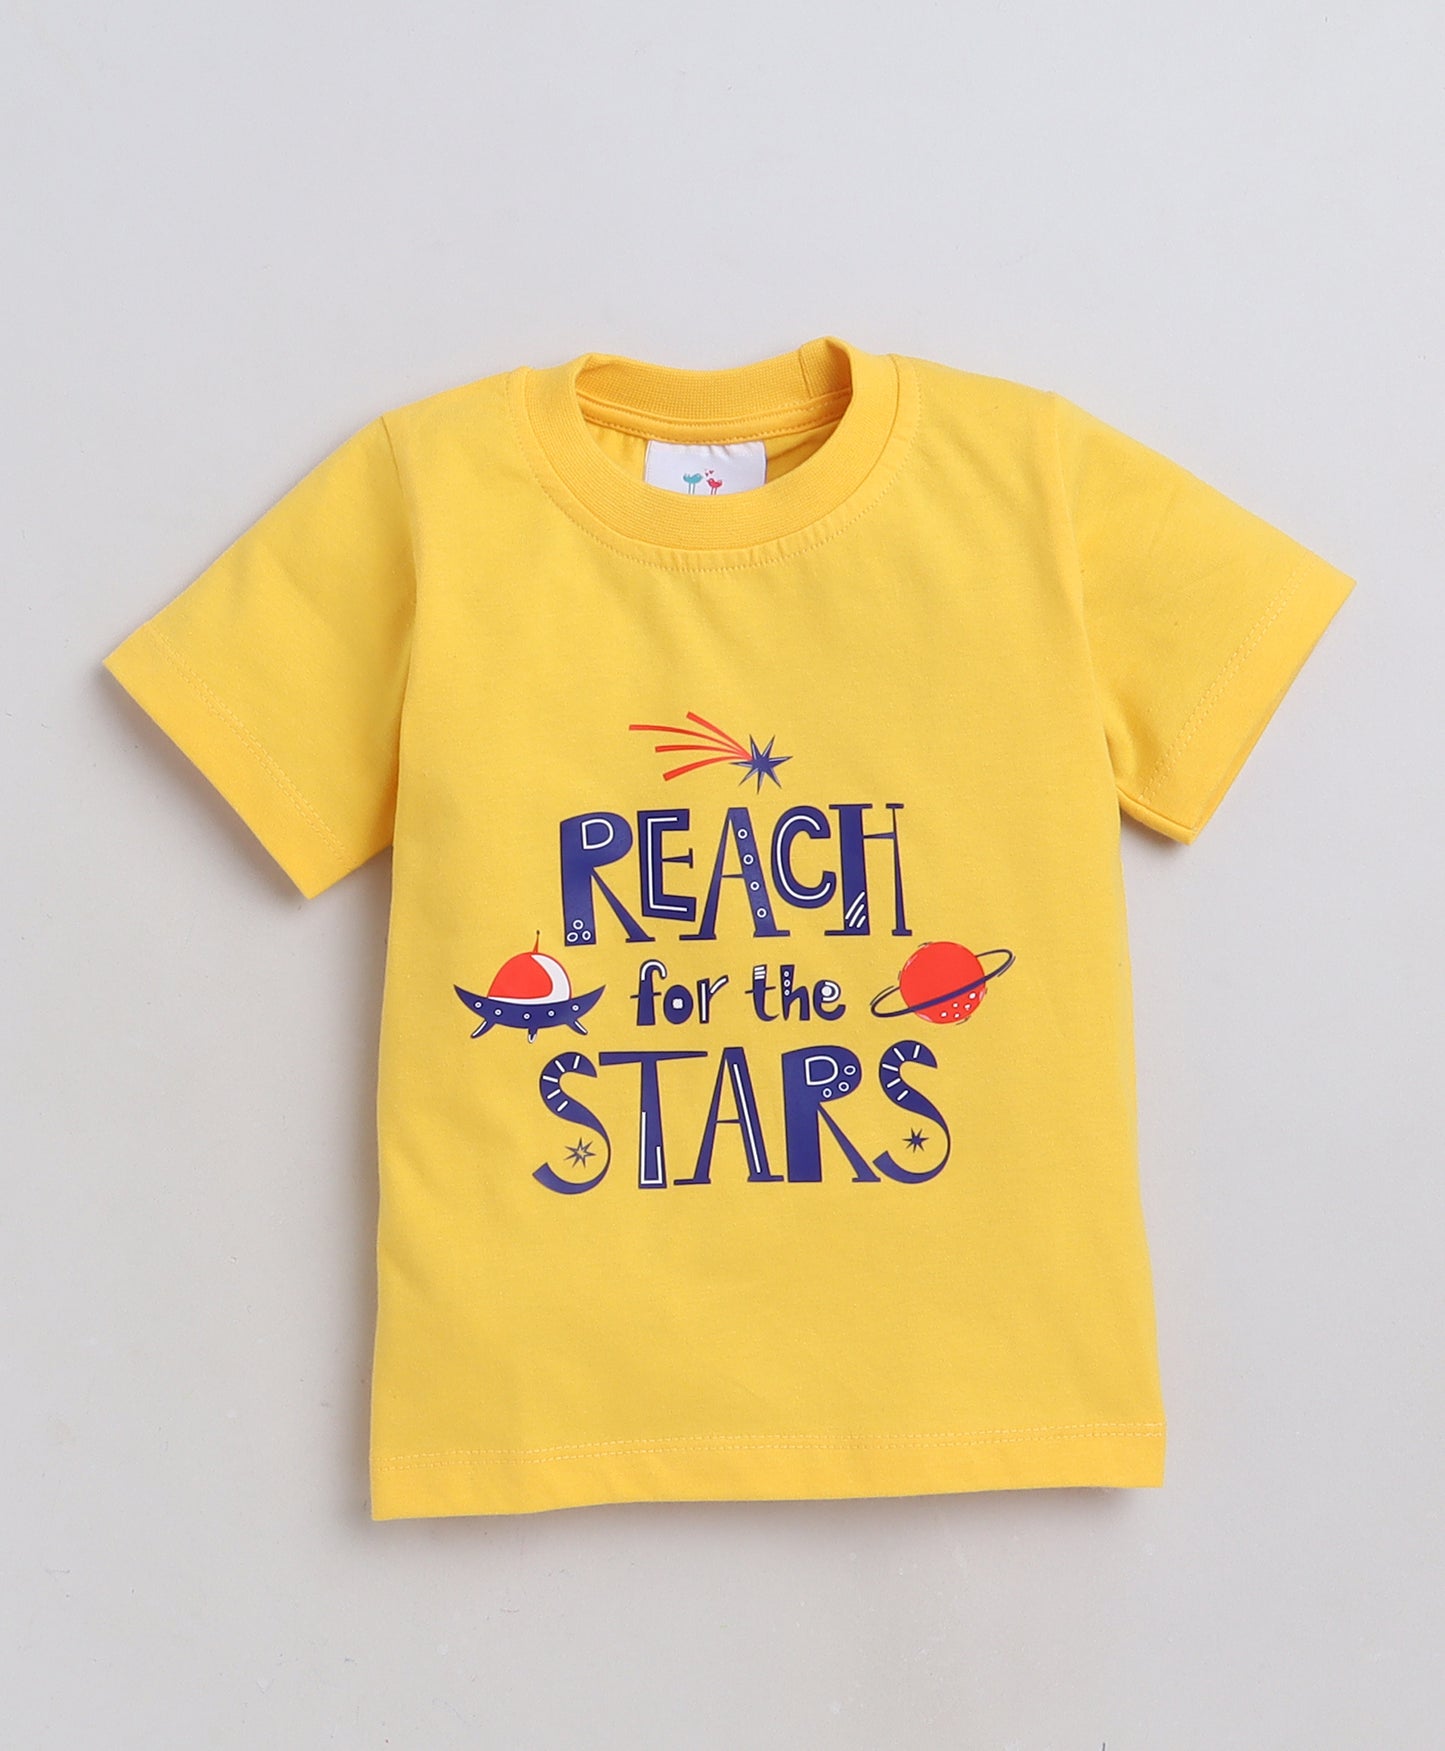 Knitting Doodles Premium Cotton Kids' Night suit with Space print t-shirt and Pyjama- Blue and Yellow